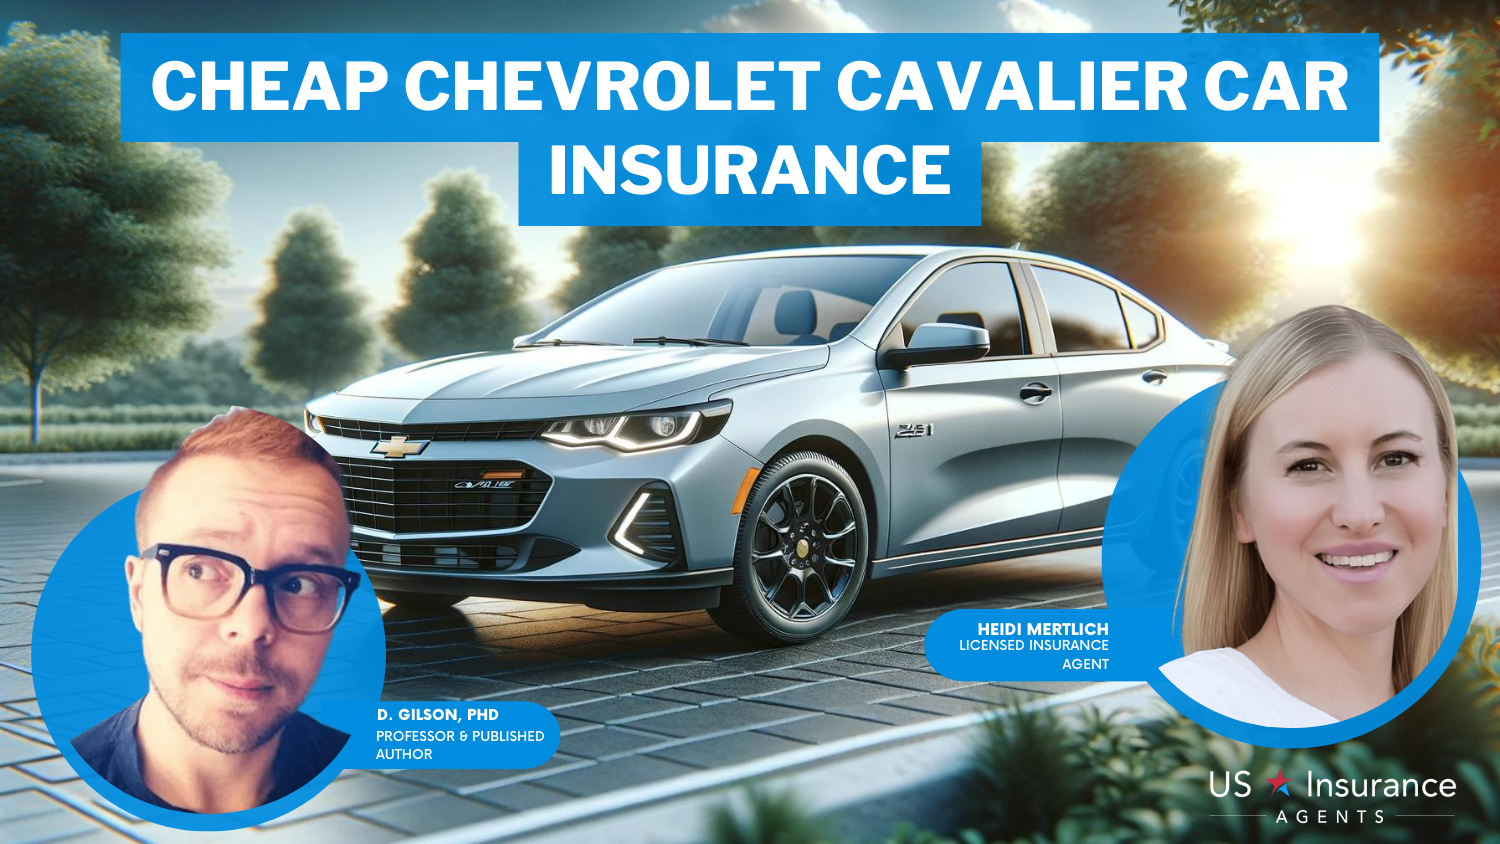 Cheap Chevrolet Cavalier Car Insurance: AAA, Auto-Owners, and State Farm.